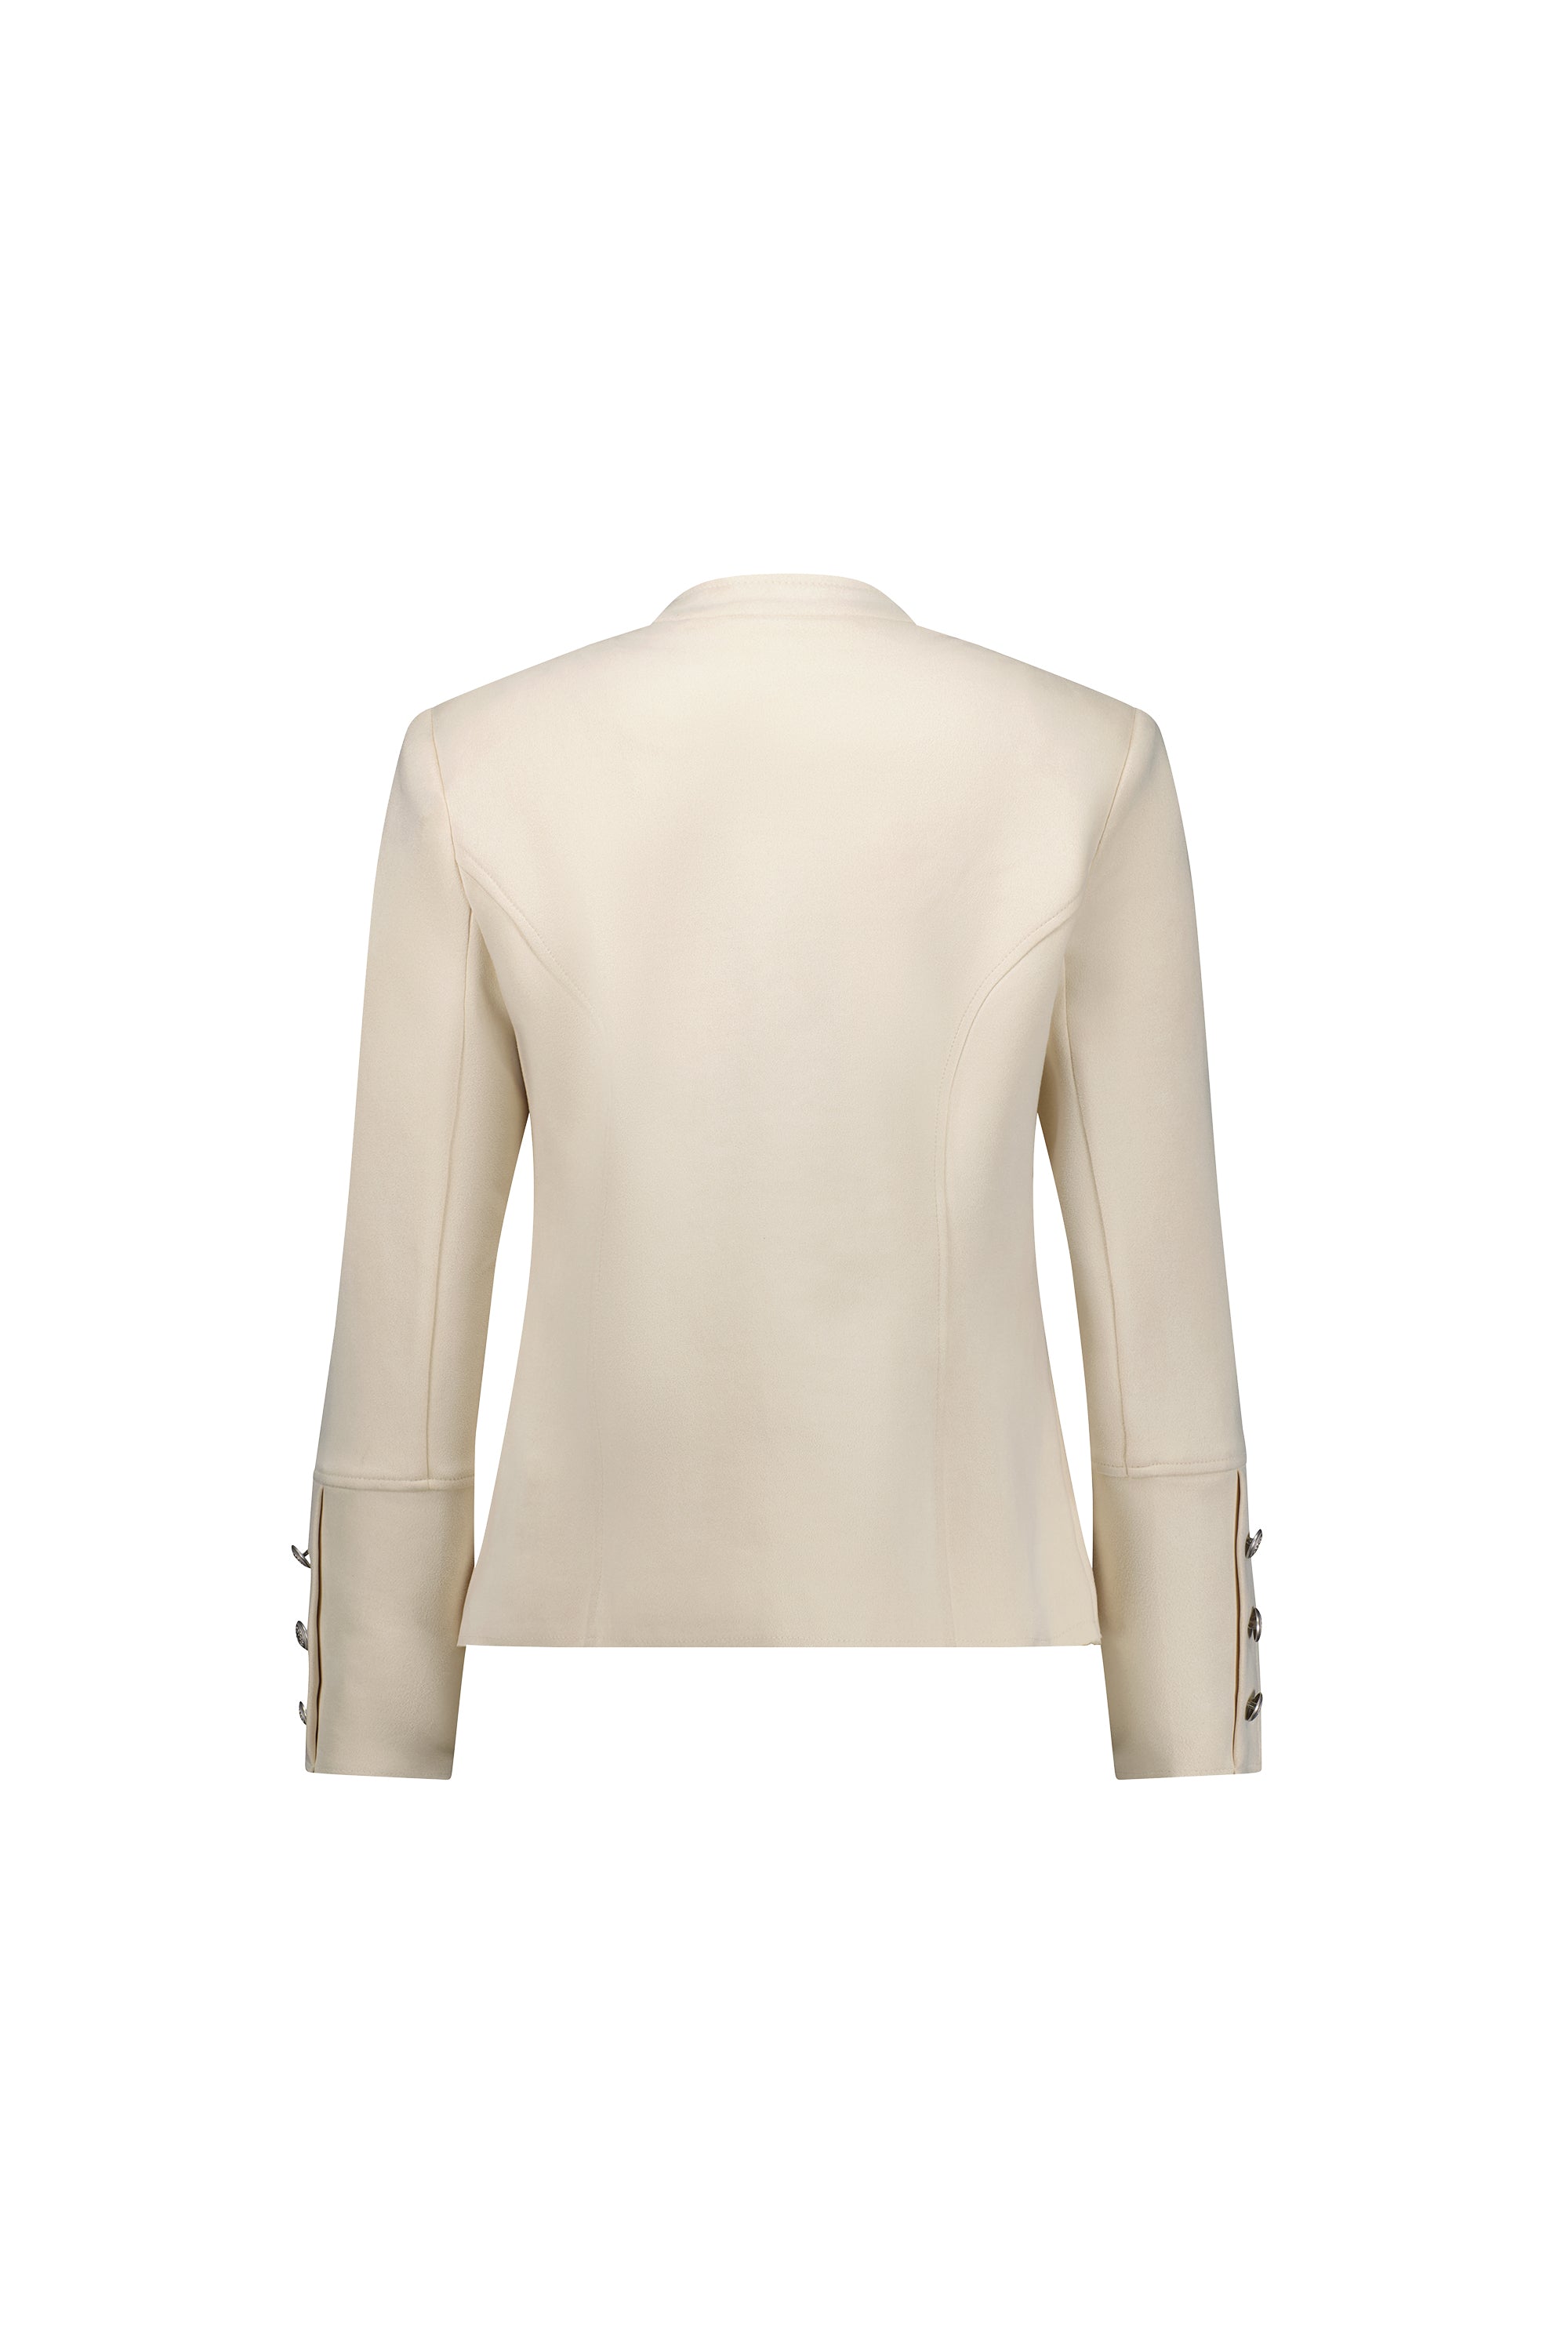 Vassalli Military Style with Button Front Detail - Ivory